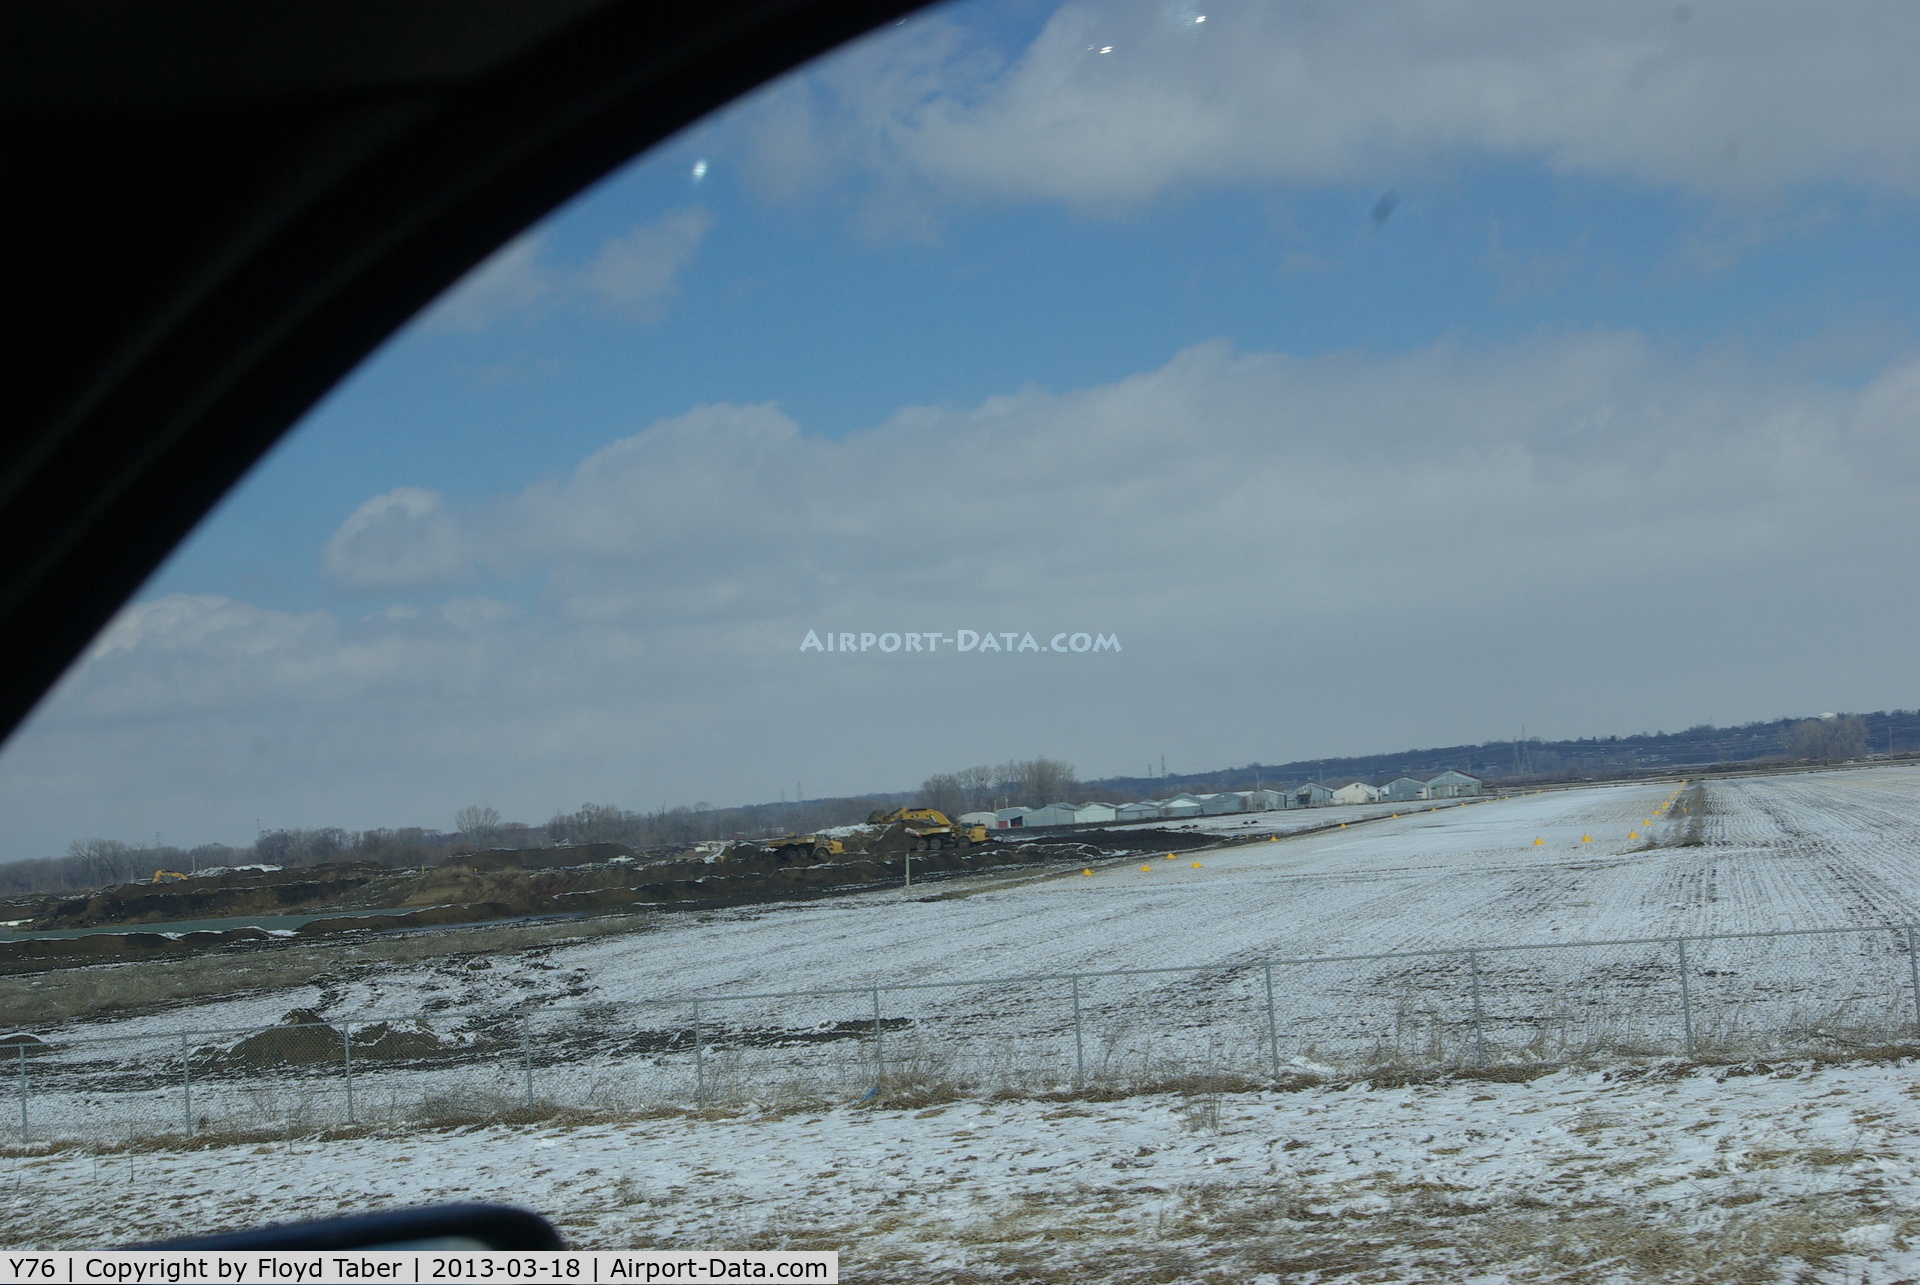 Morningstar Field Airport (Y76) - Before its closure